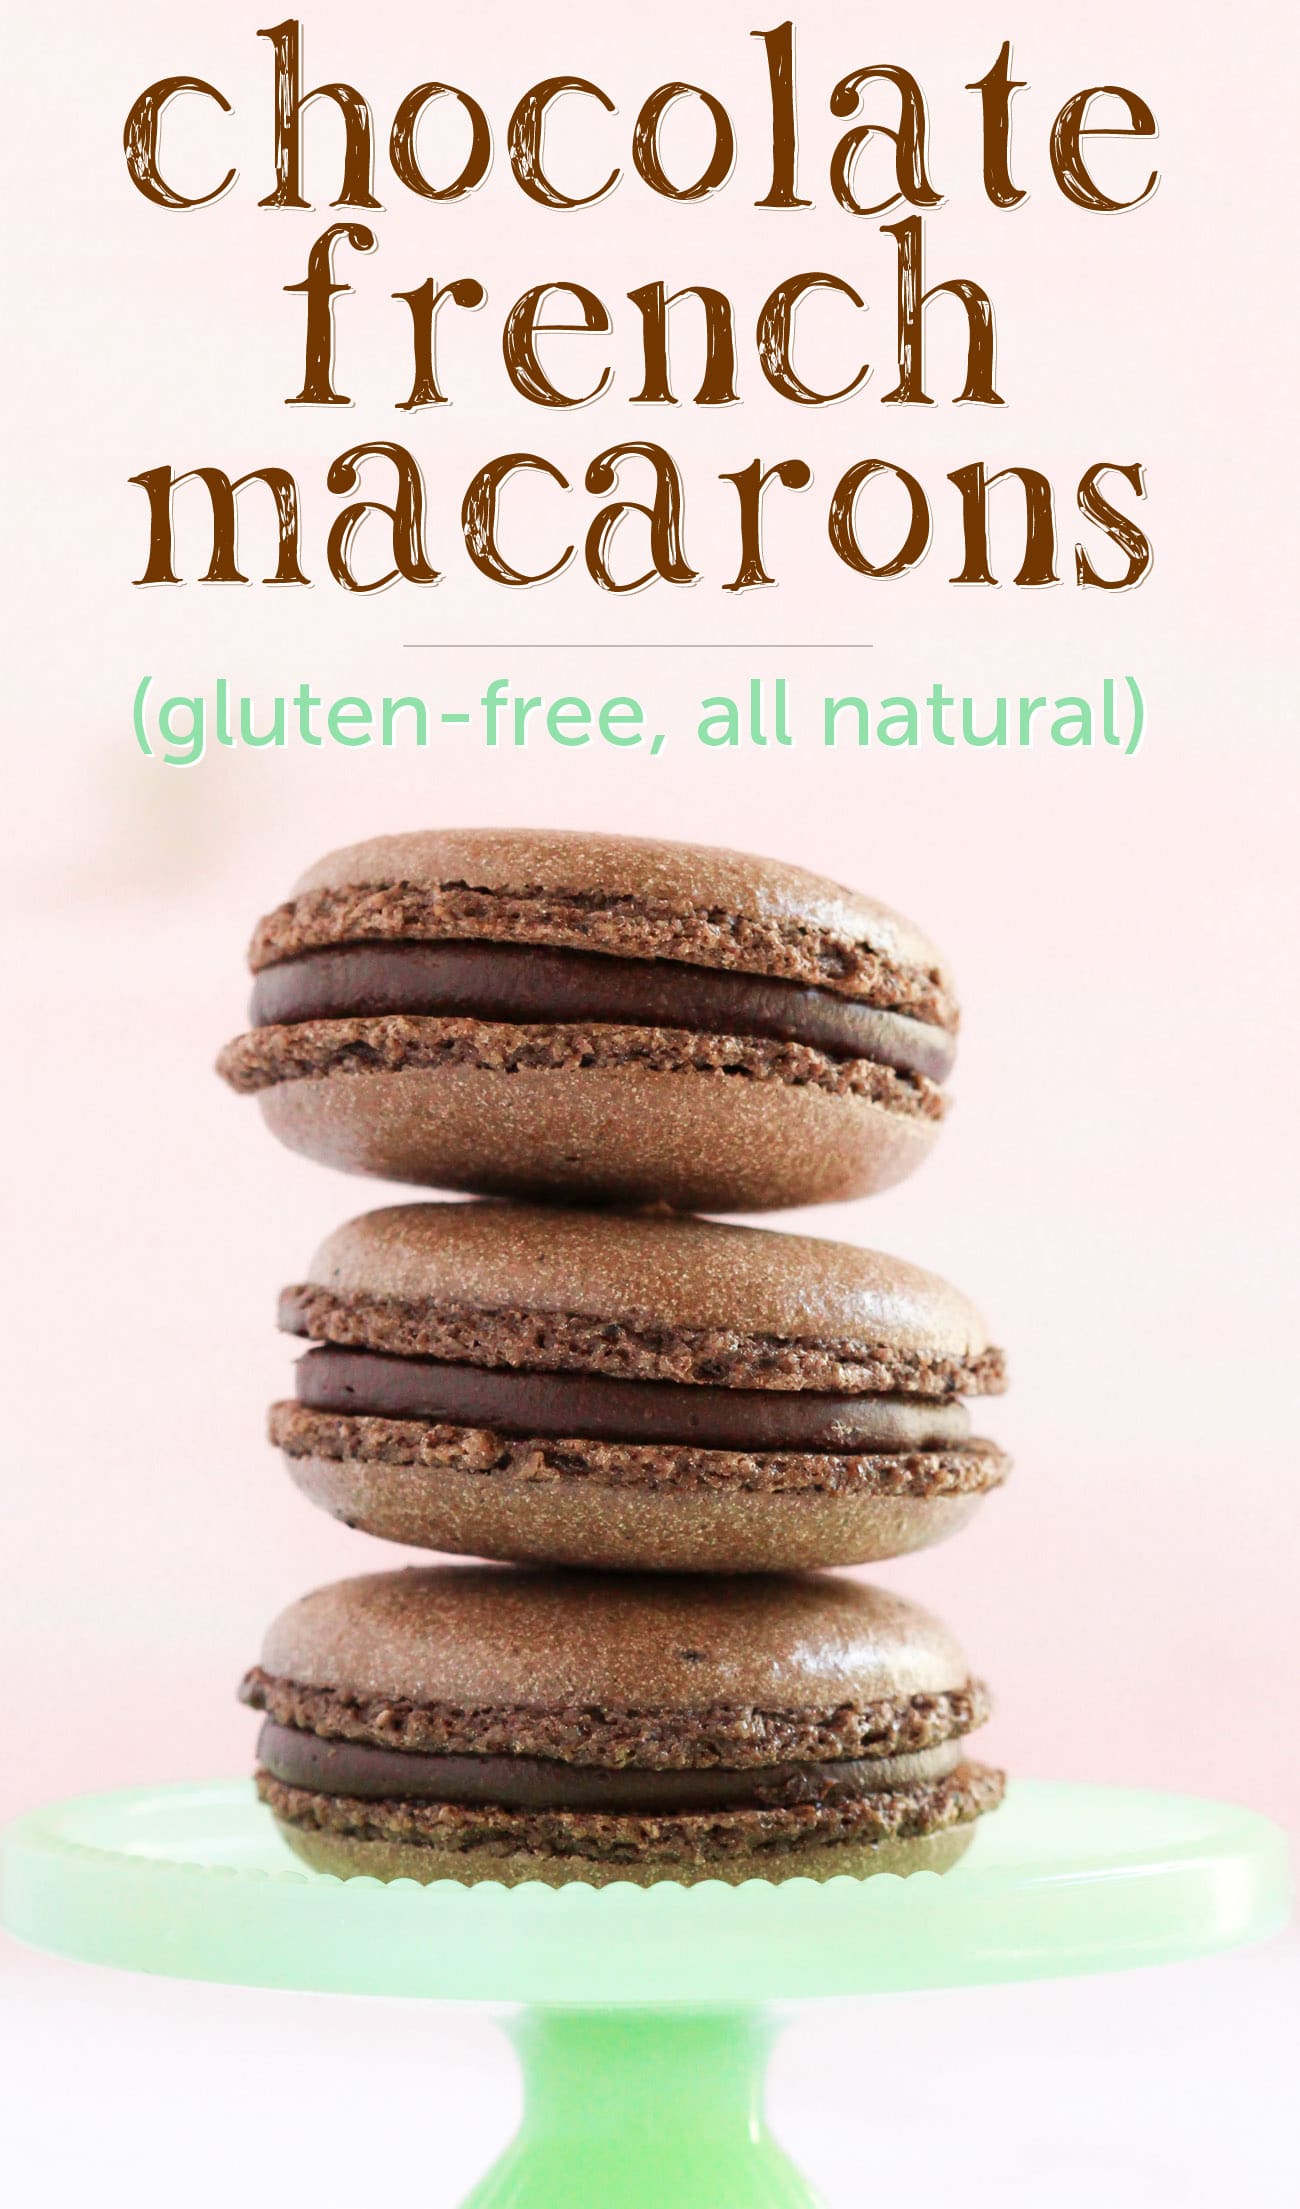 These Gluten Free Chocolate French Macarons are perfectly sweet and chewy, thanks to the almond meal and dark cocoa powder! Made without the bleached white sugar and artificial flavors, yet you'd never know! #chocolate #frenchmacarons #macarons #glutenfree #glutenfreemacarons #valentinesday